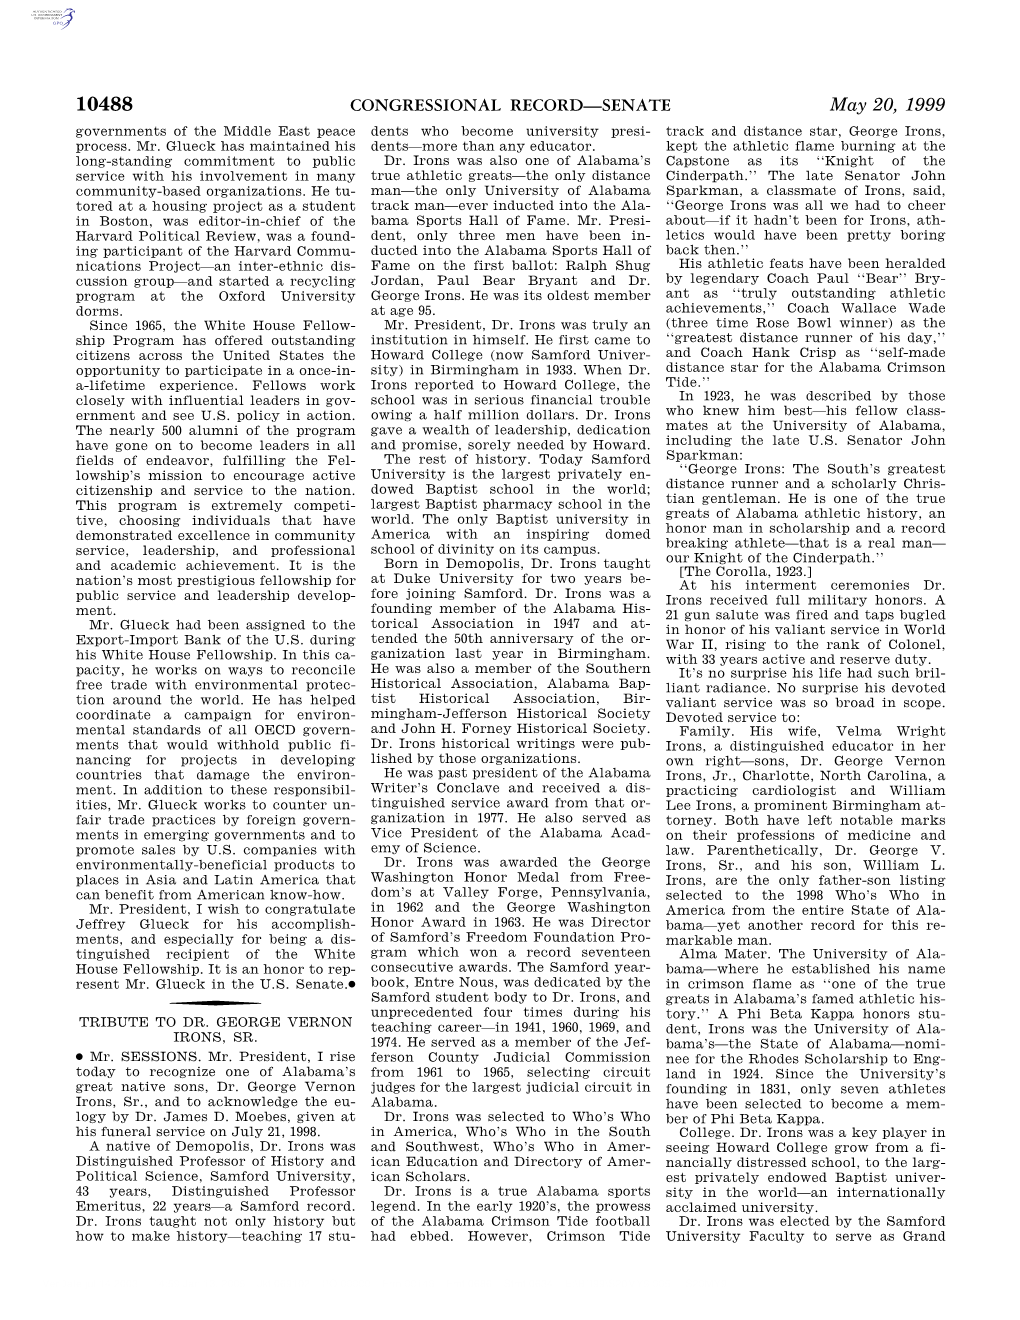 CONGRESSIONAL RECORD—SENATE May 20, 1999 Governments of the Middle East Peace Dents Who Become University Presi- Track and Distance Star, George Irons, Process